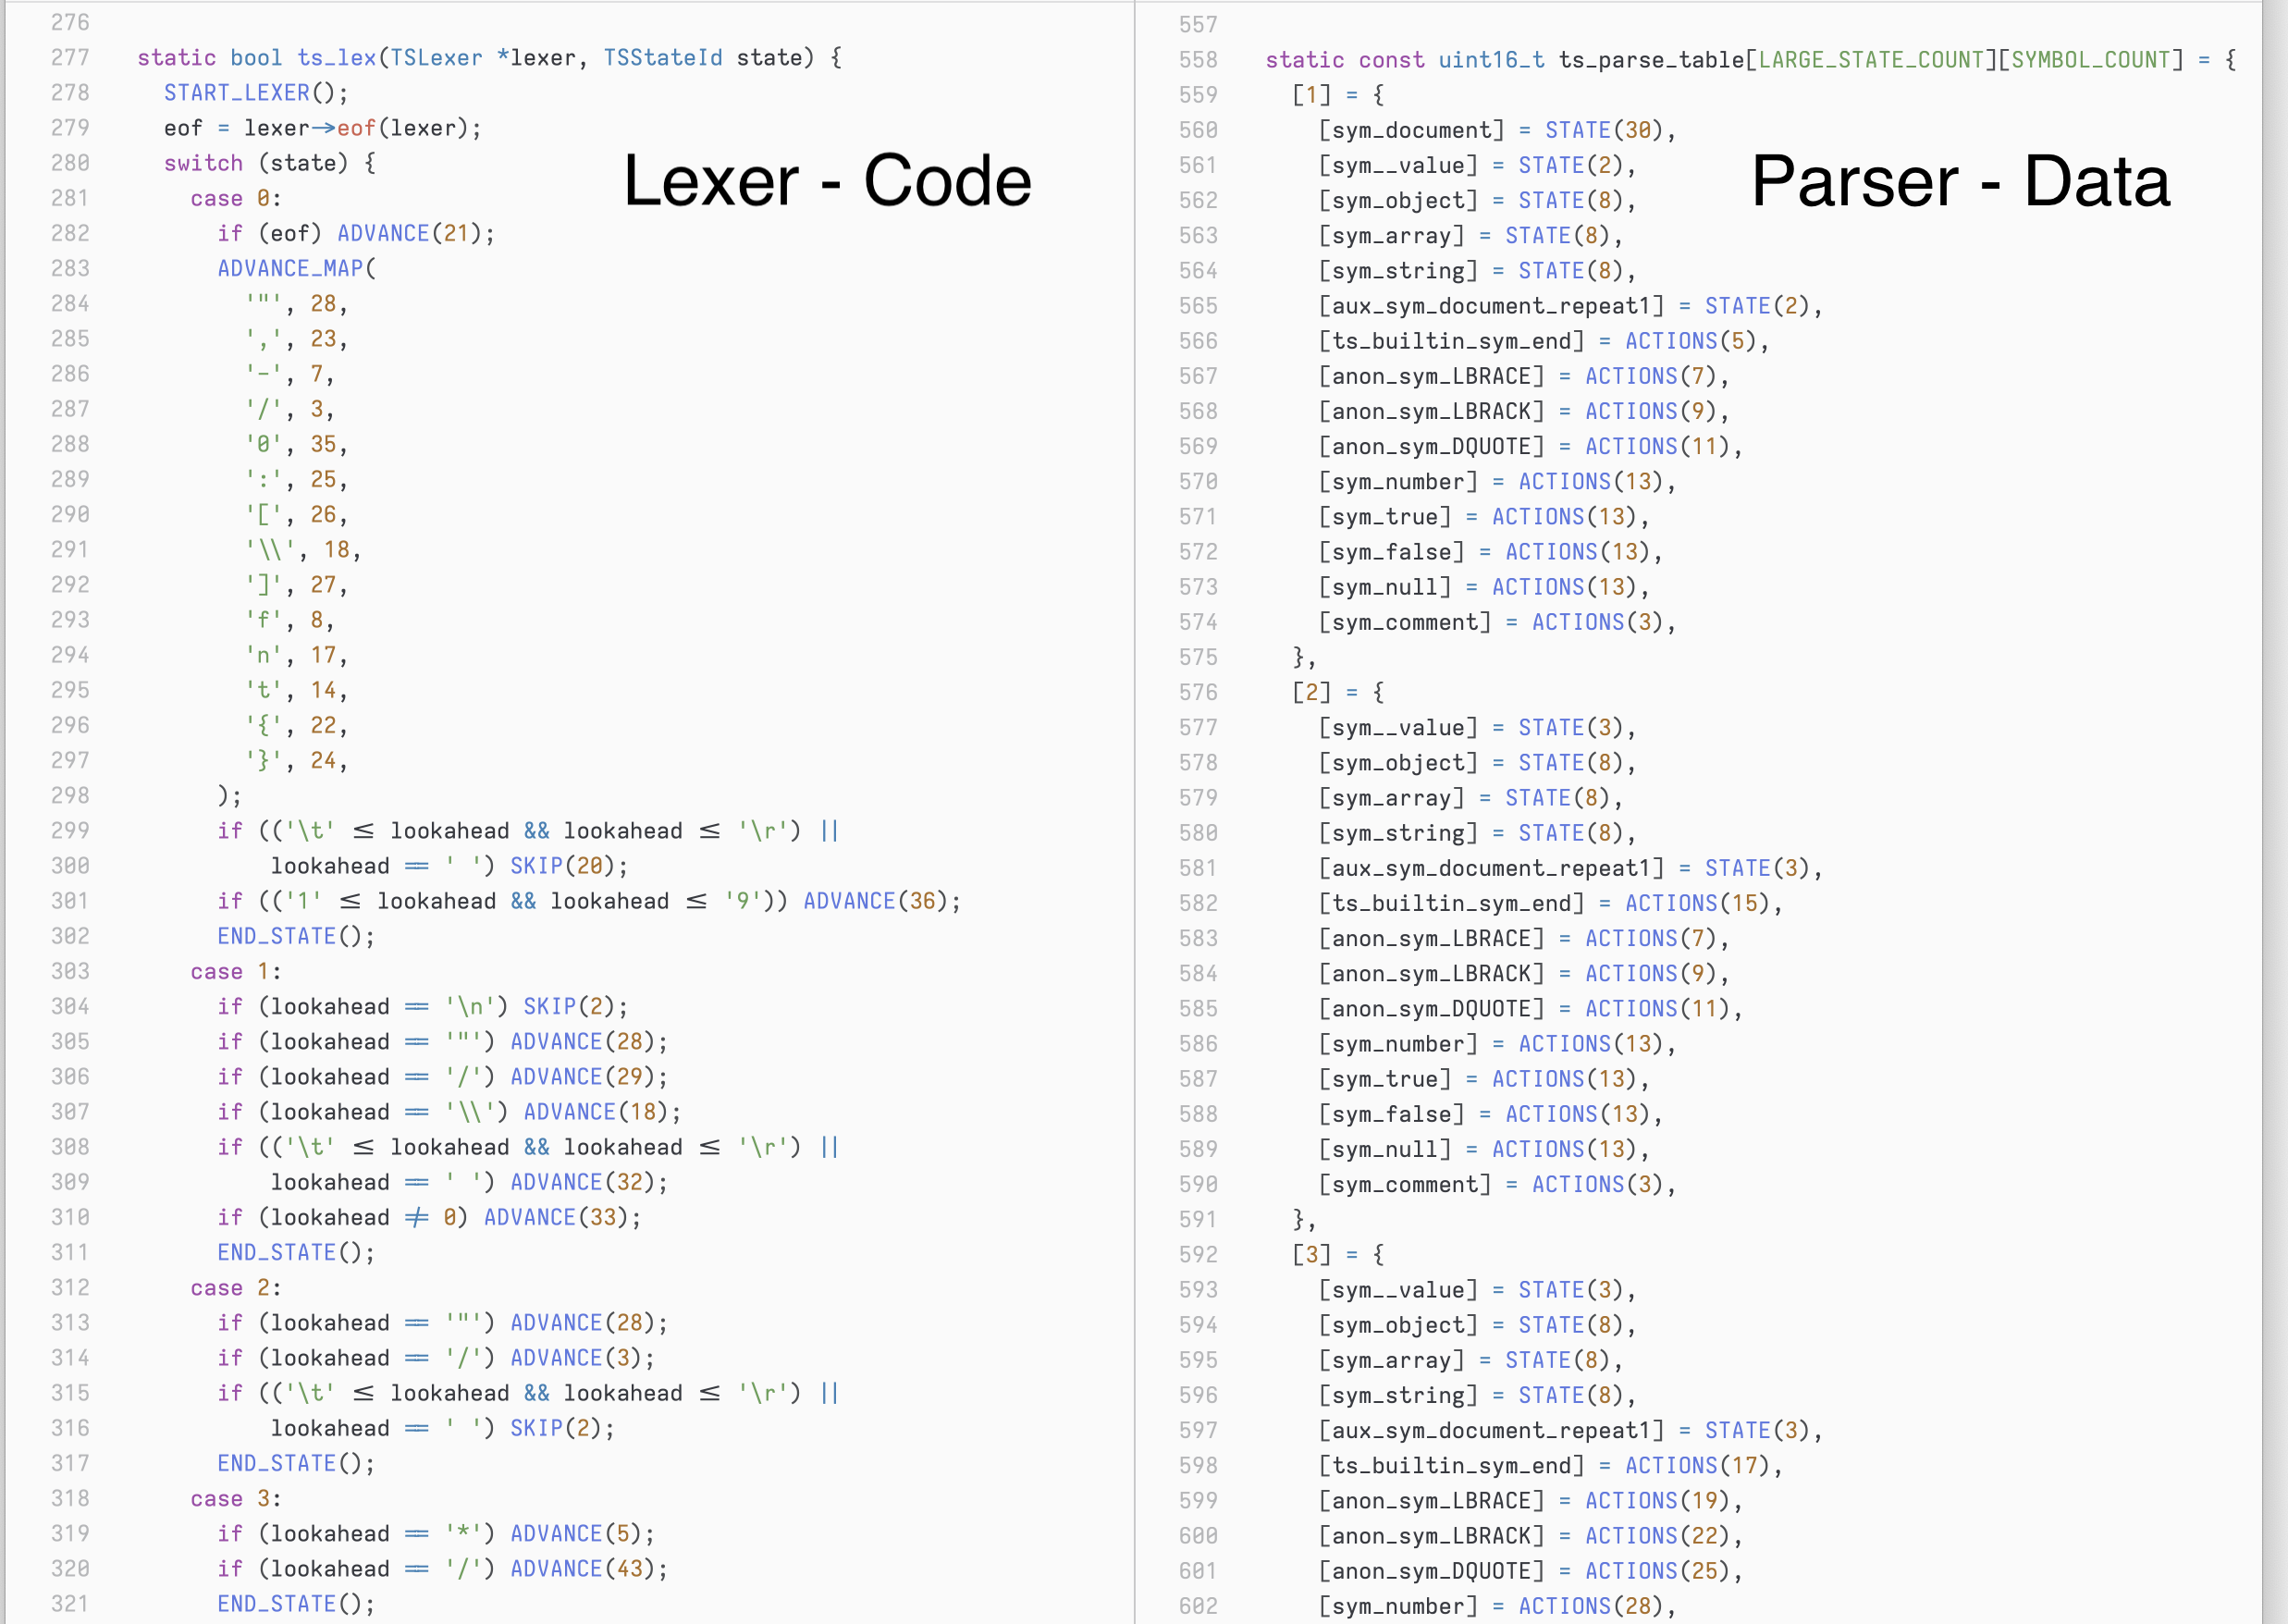 The lexing logic for a grammar is encoded as executable code, while the parsing logic is encoded as static data.